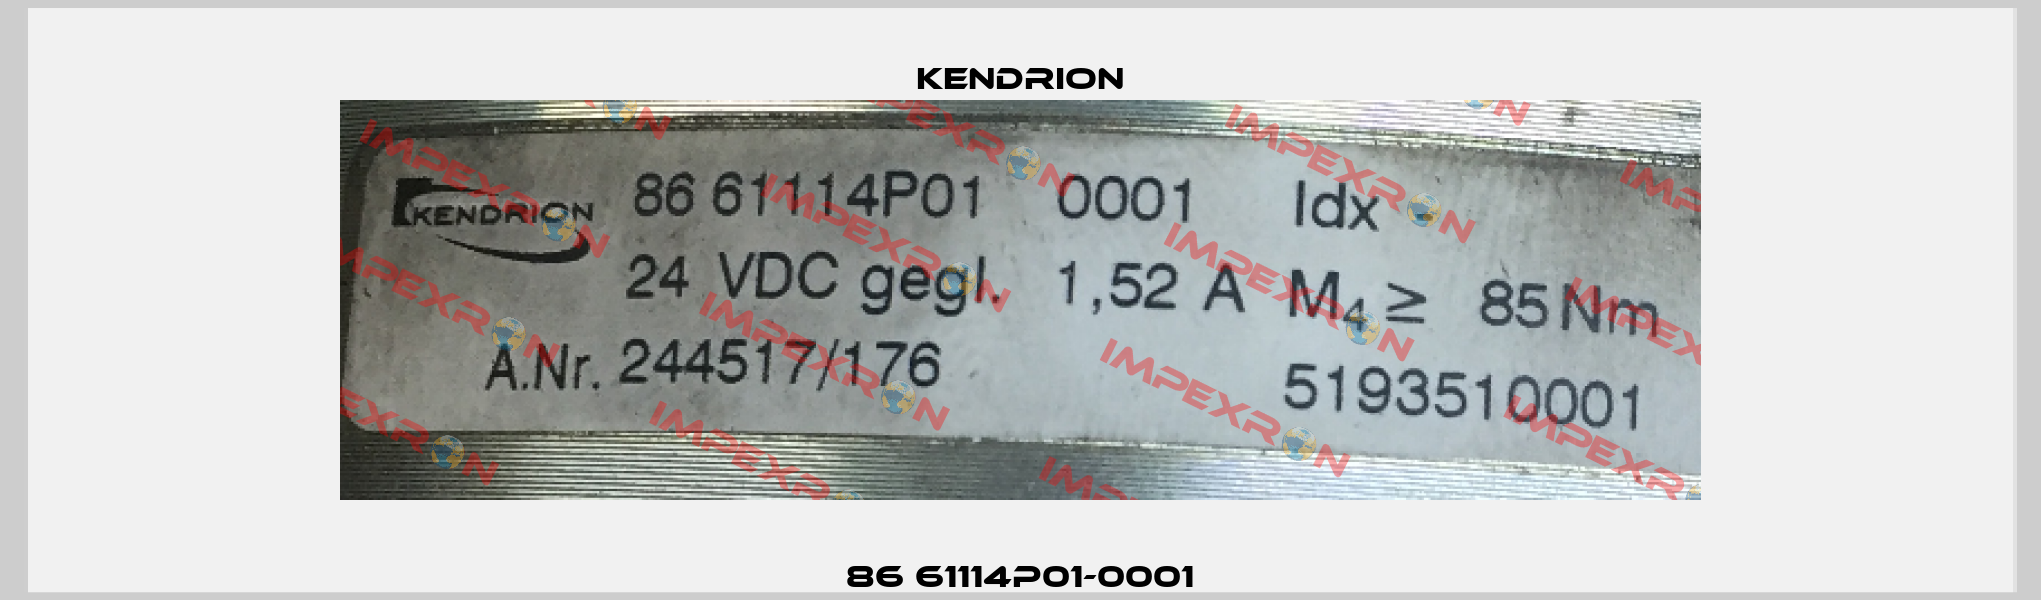 86 61114P01-0001 Kendrion